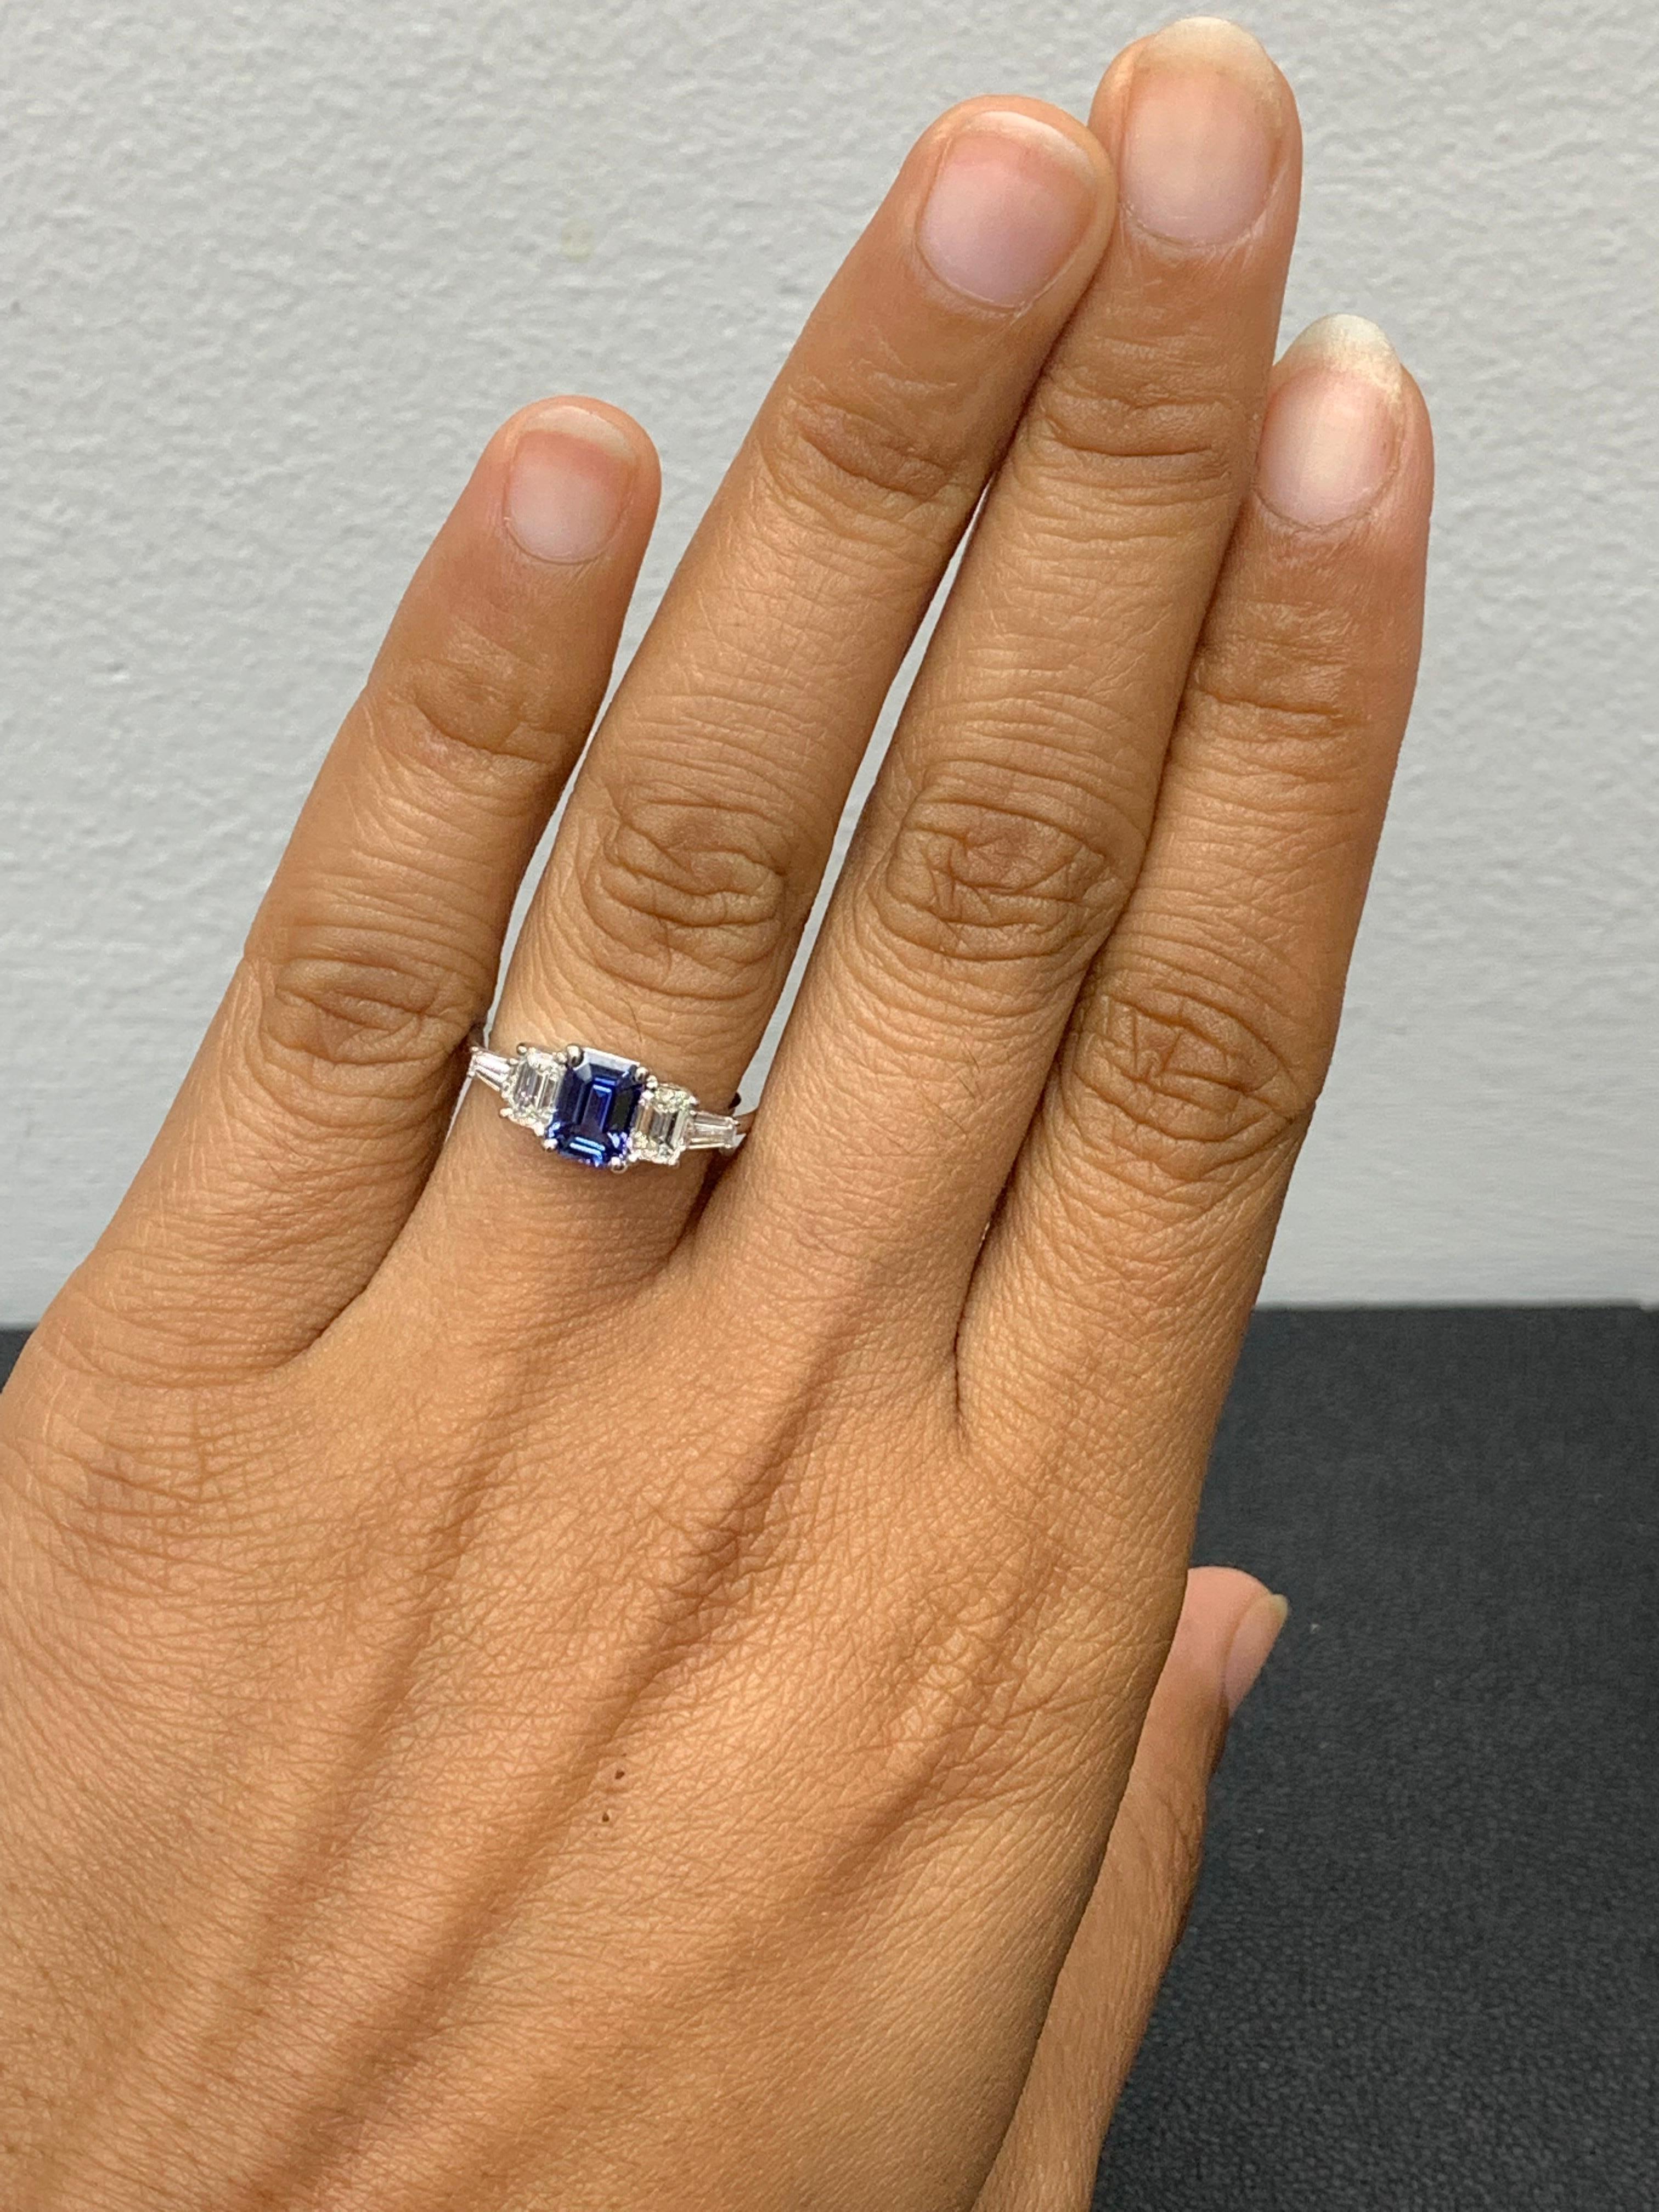 1.12 Carat Emerald Cut Blue Sapphire and Diamond 5 Stone Ring in 14K White Gold For Sale 3